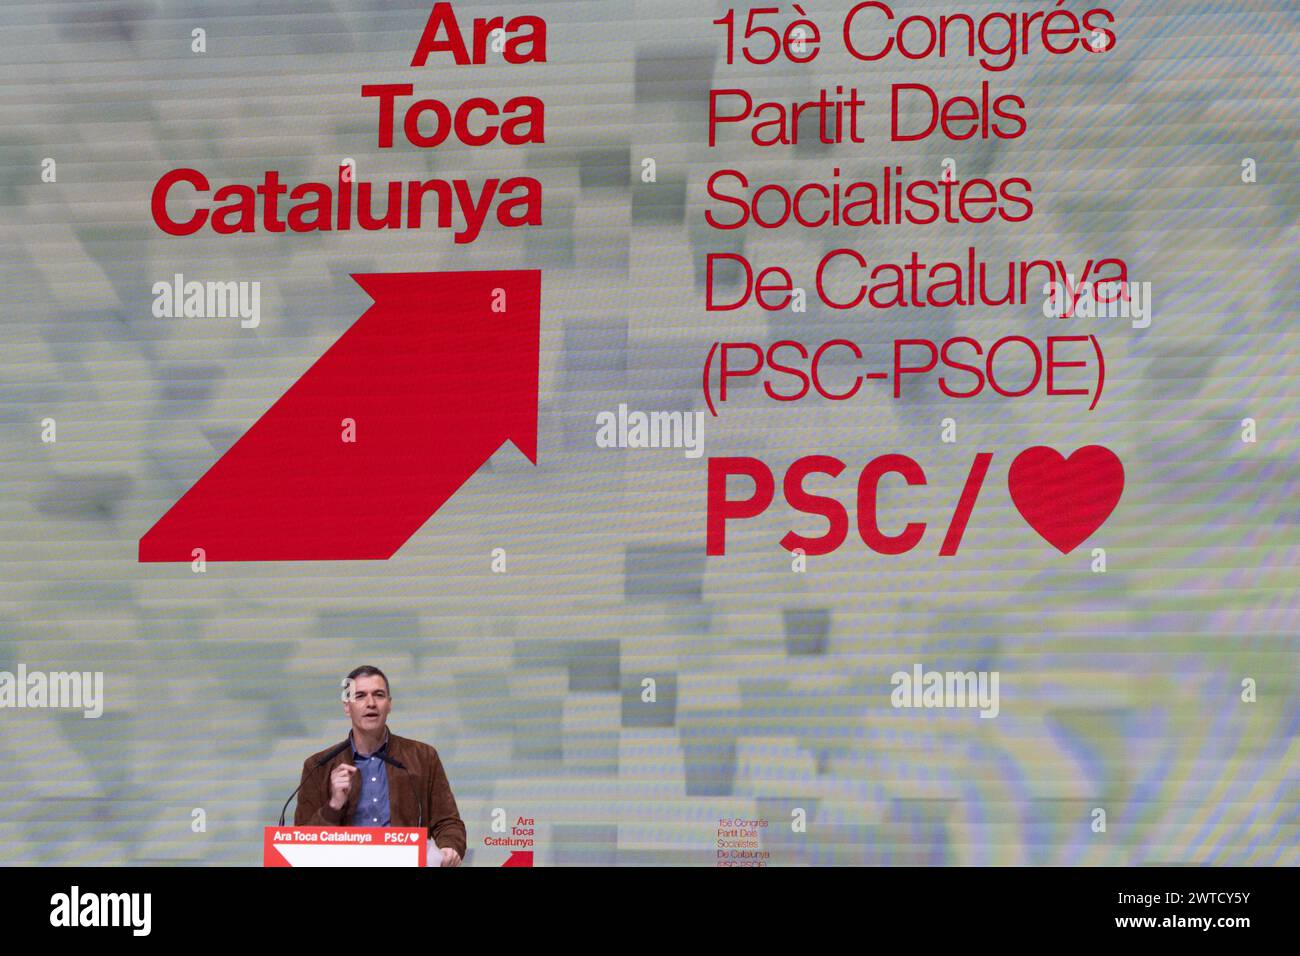 The 15th congress of the Socialist Party of Catalonia (PSC) concludes, with the presence of the Spanish Prime Minister and Secretary-General of the Spanish Socialist Workers' Party (PSOE), Pedro Sánchez, in an electoral atmosphere in Catalonia due to the call for autonomous elections on May 12th. Although the congress had been planned for weeks, the coincidence with the call for elections has given it an electoral tone, with the PSC feeling like the favorites to win due to the latest opinion polls published.' Termina el 15 congreso del Partit dels Socialistes de Catalunya (PSC), con la presen Stock Photo